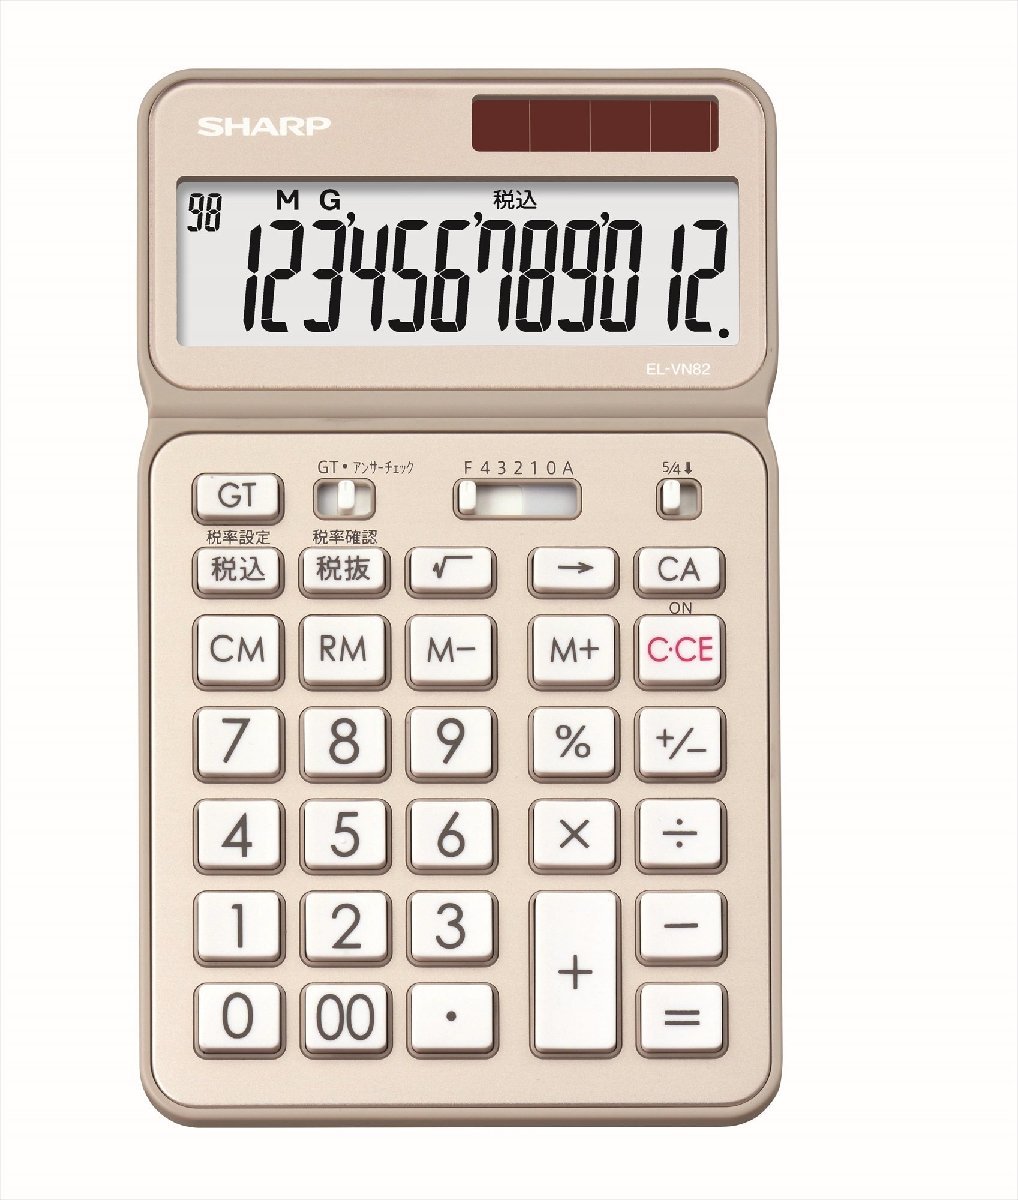  free shipping * sharp calculator 50 anniversary commemoration model Nice size model gold group EL-VN82-NX